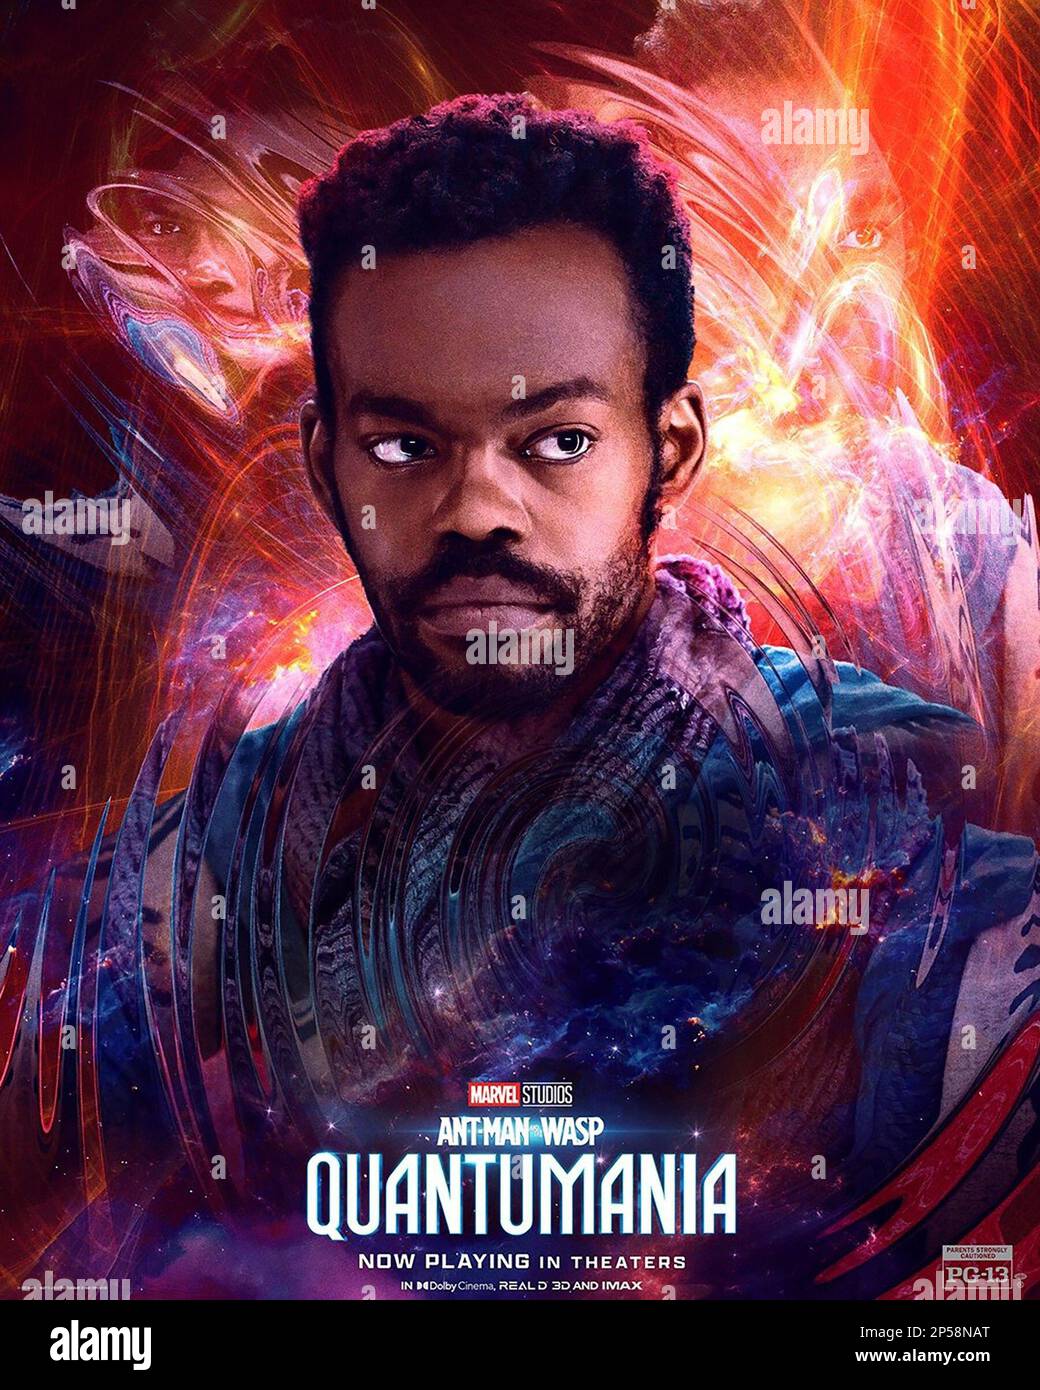 Ant-Man and The Wasp: Quantumania': Explore Quantum Character Posters